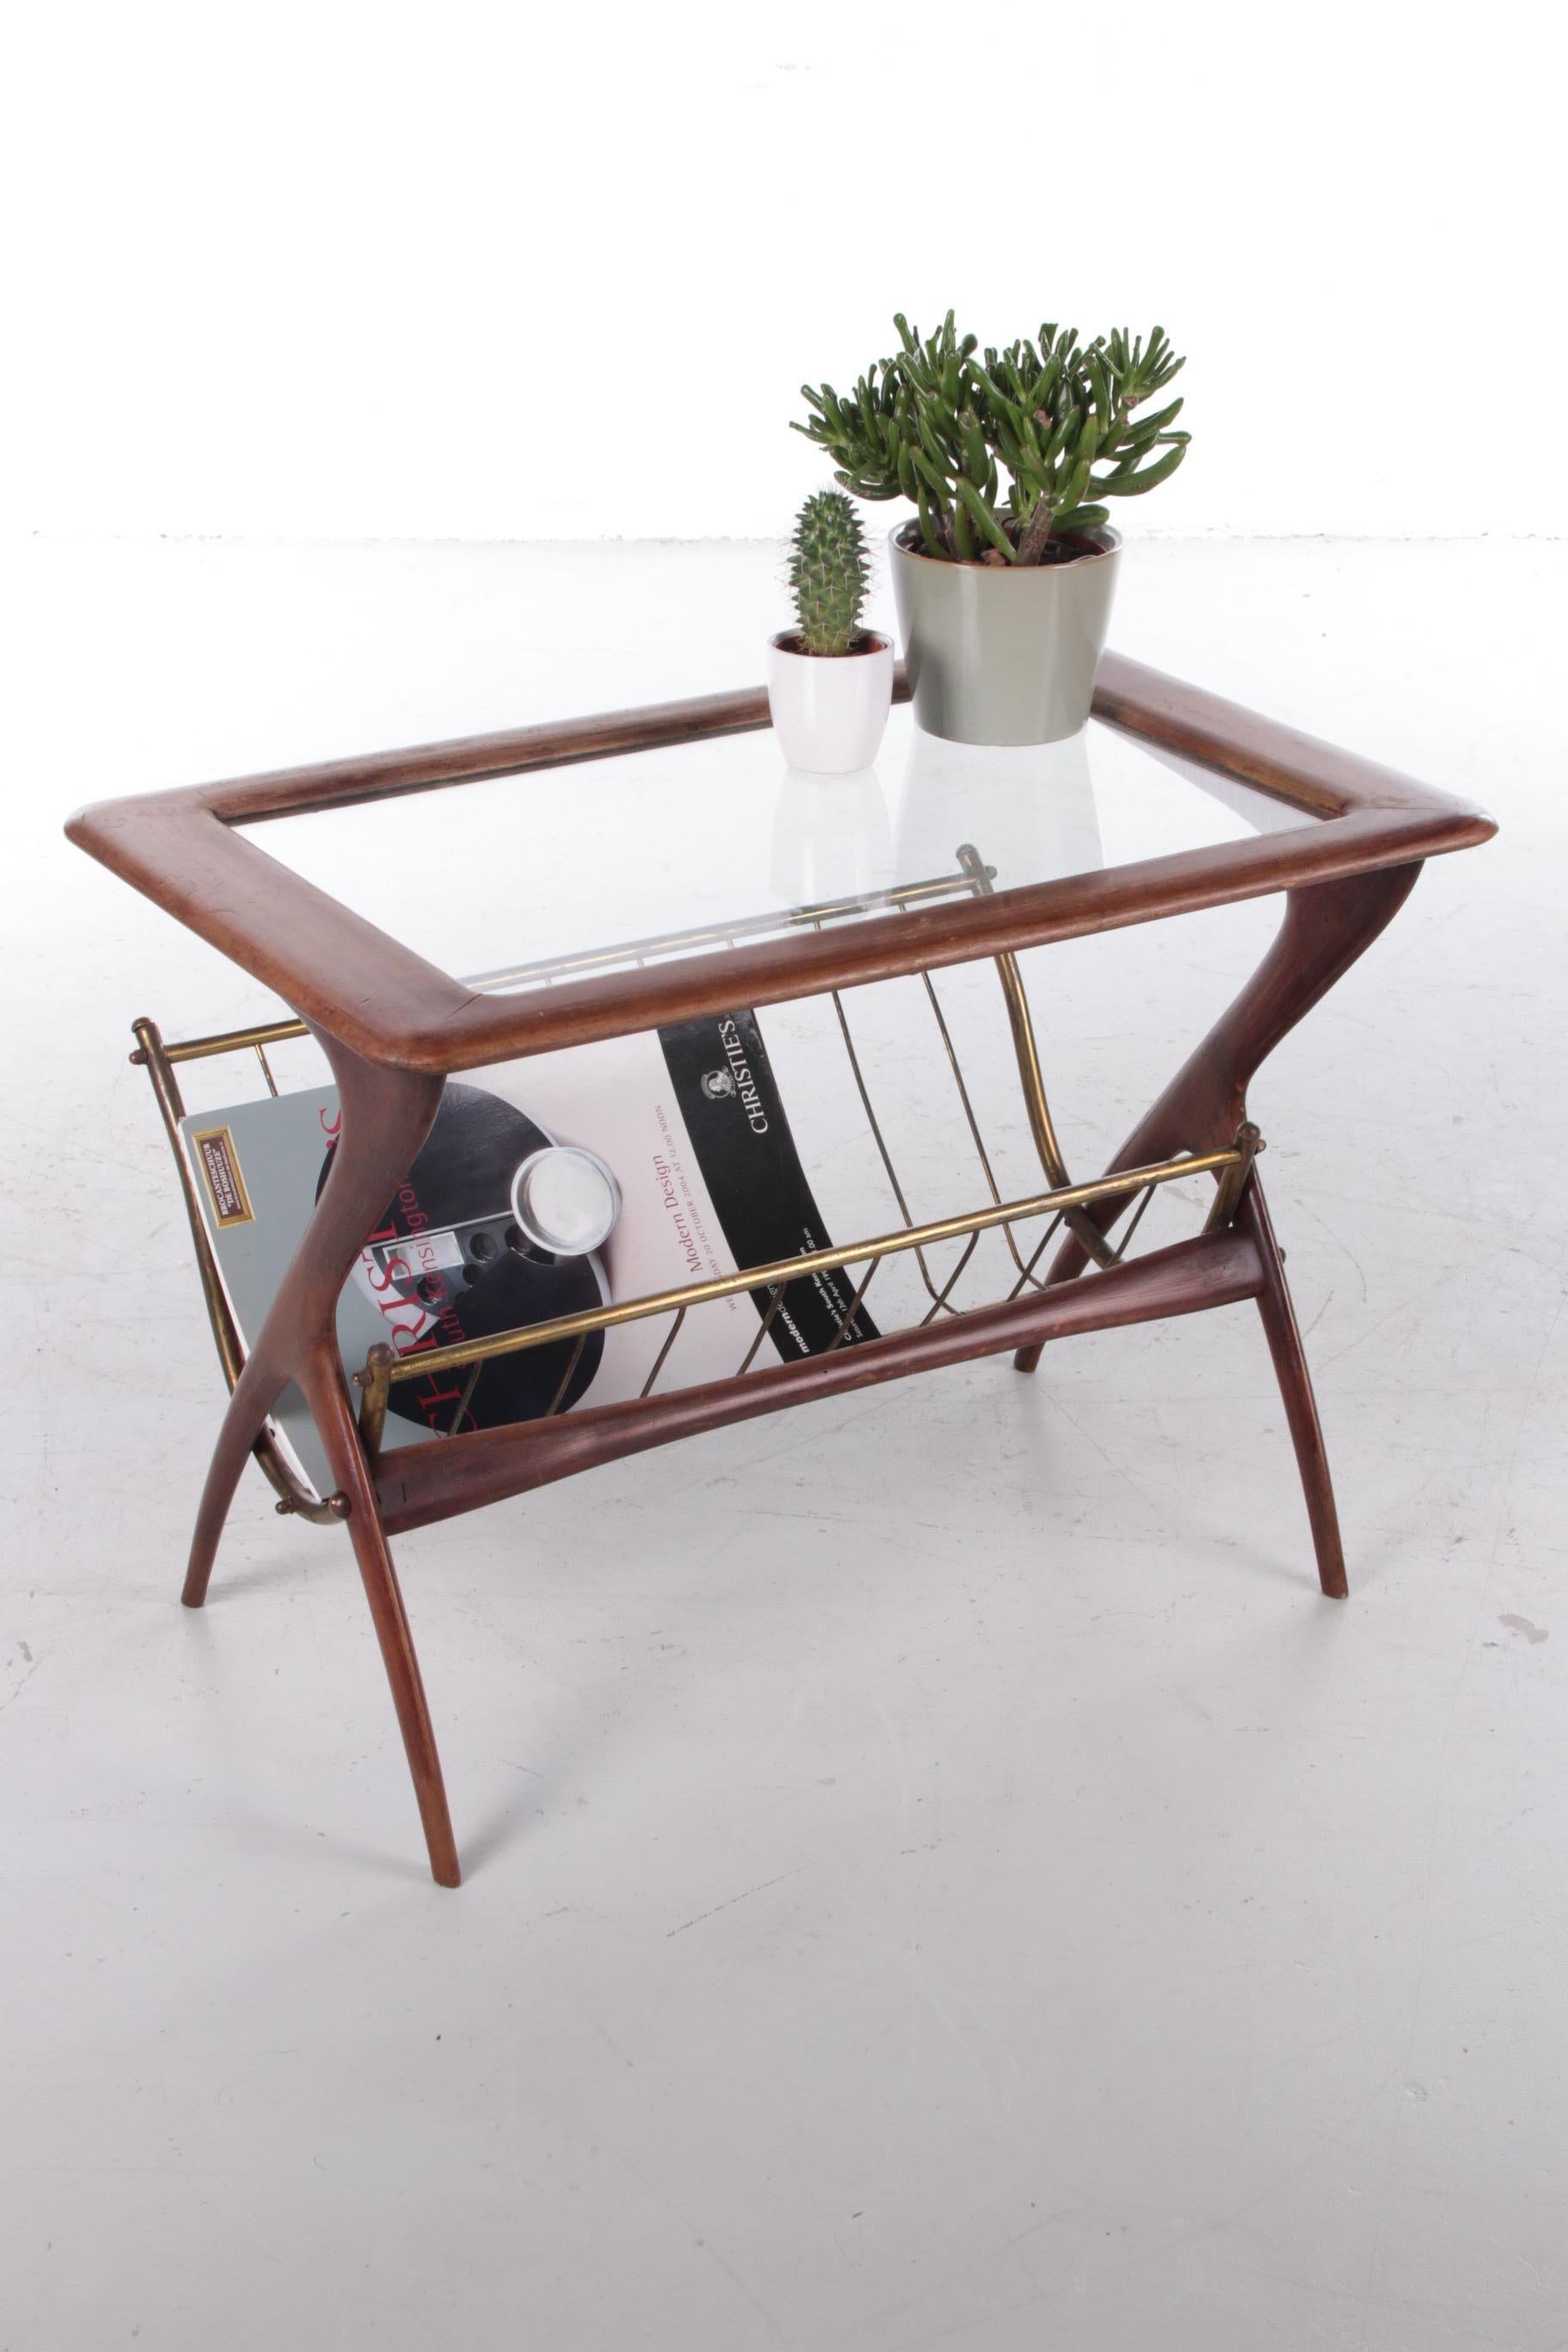 This is a beautiful design by the Italian designer Ico Parisi, produced in Italy around the 1960s.

It is made of lacquered mahogany wood with a beautiful deep brown color, with brass in the frame of the magazine rack. It has a clear inlaid glass